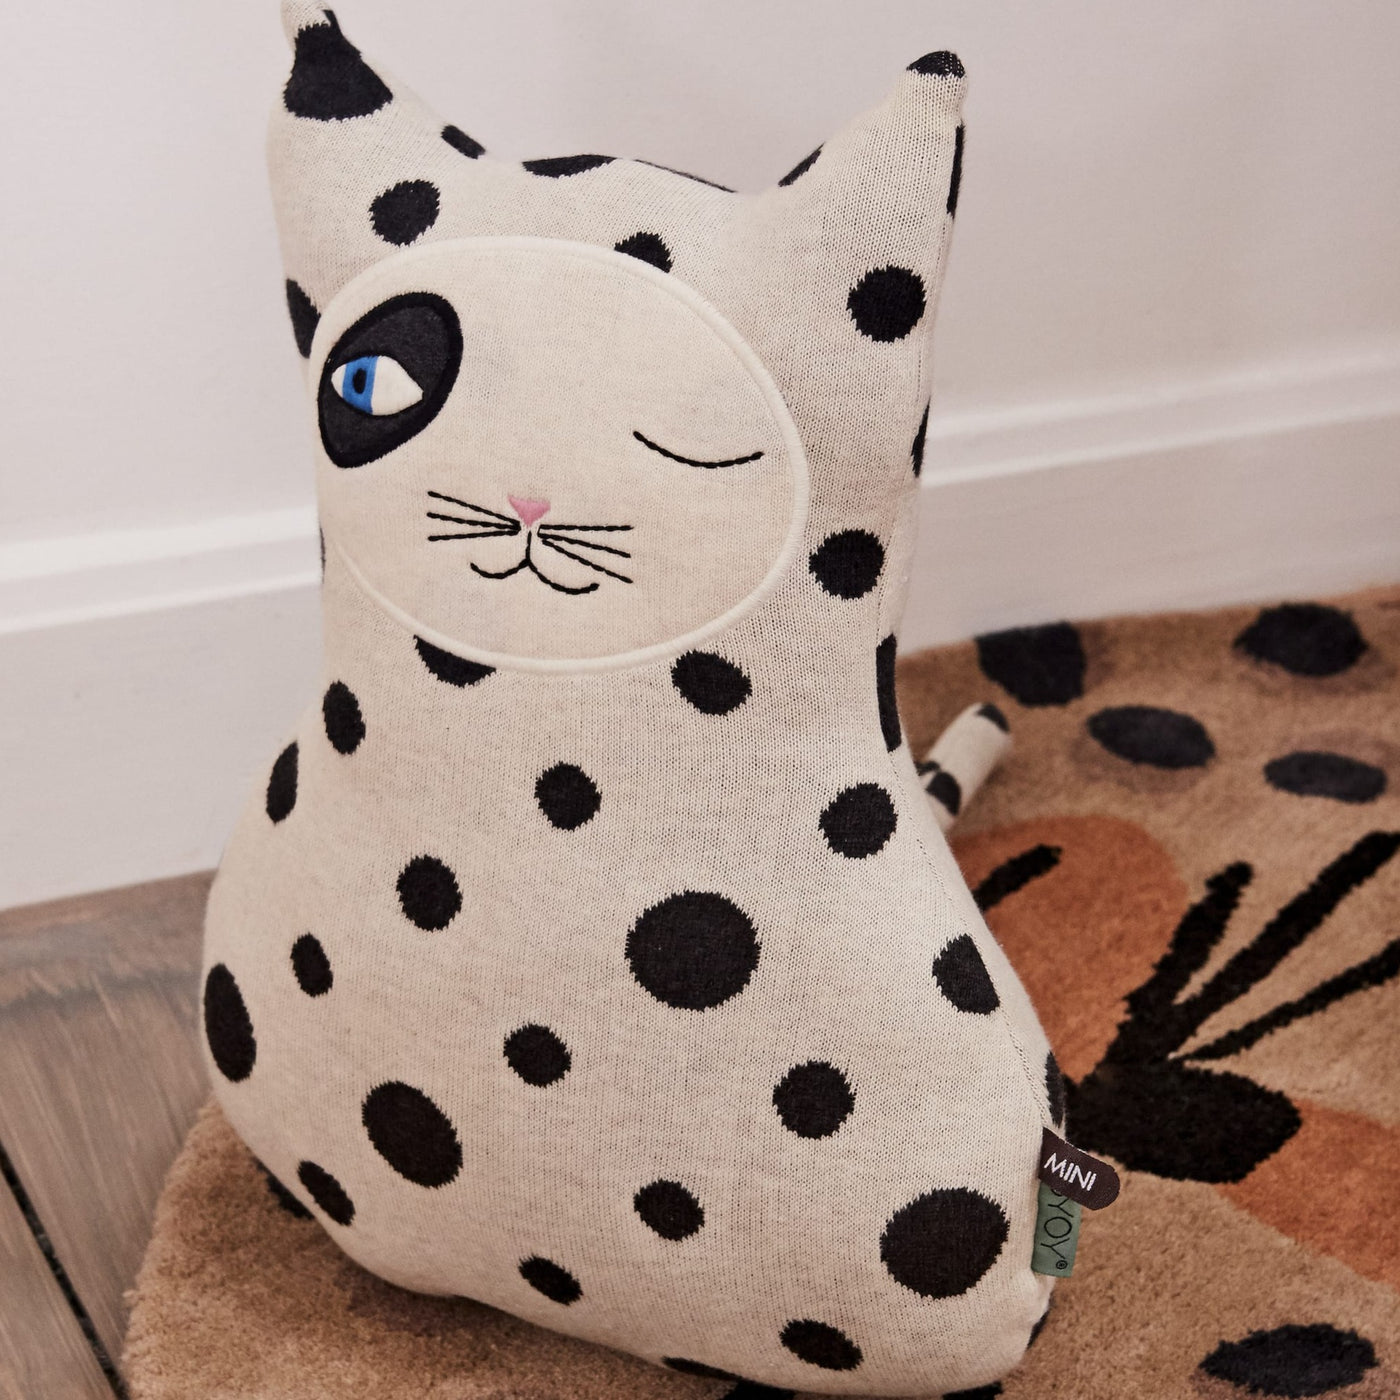 the cool cat zorro cushion by OYOY has a stylish monochrome spotty print and distinctive eye detailing.